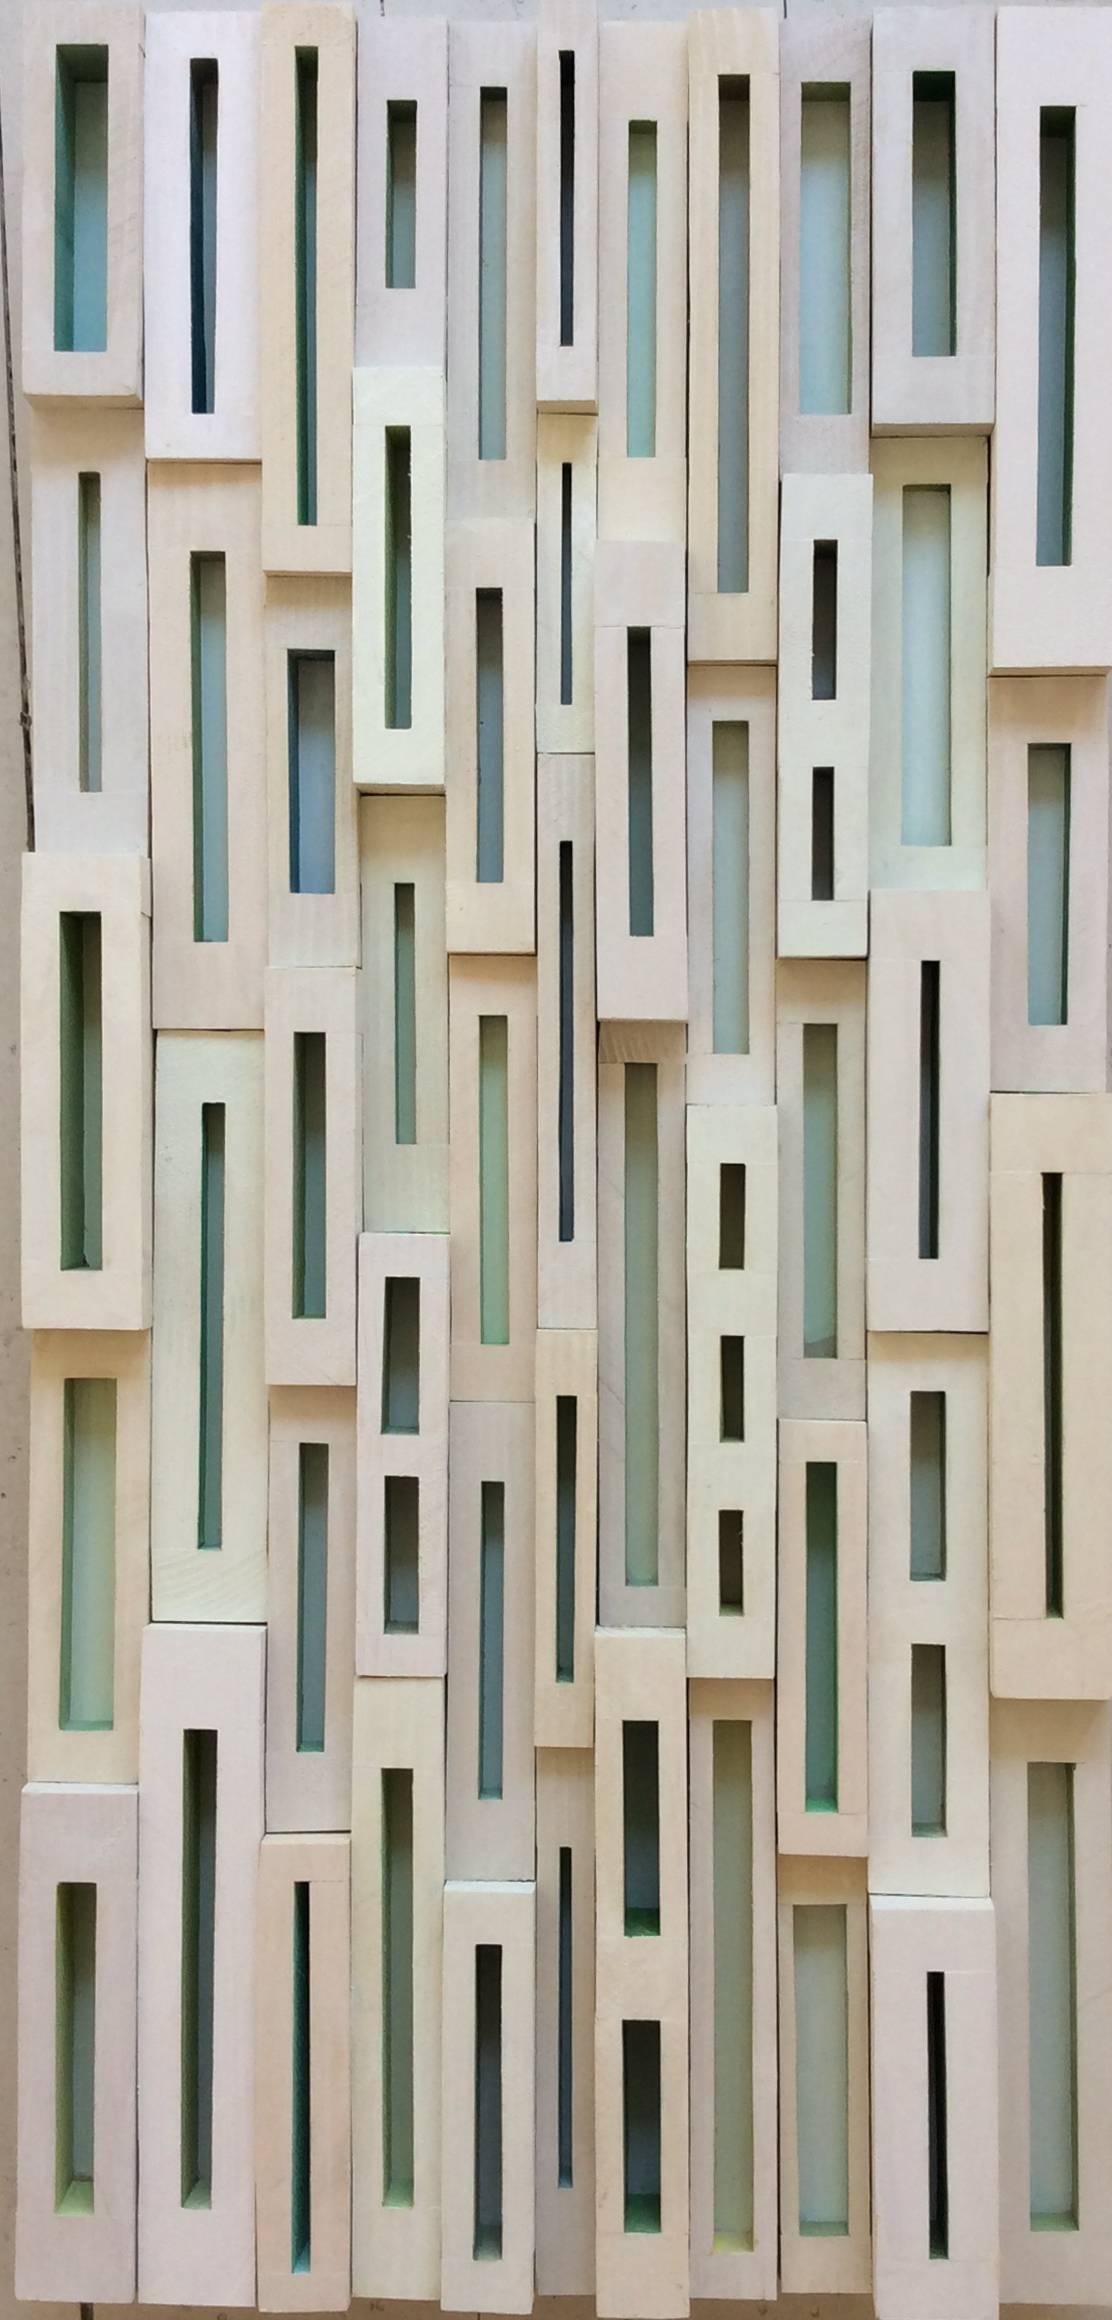 Stephen Walling Abstract Sculpture - Glimpses (Abstract Mid-Century Modern 3-D Wall Sculpture in Green & White)